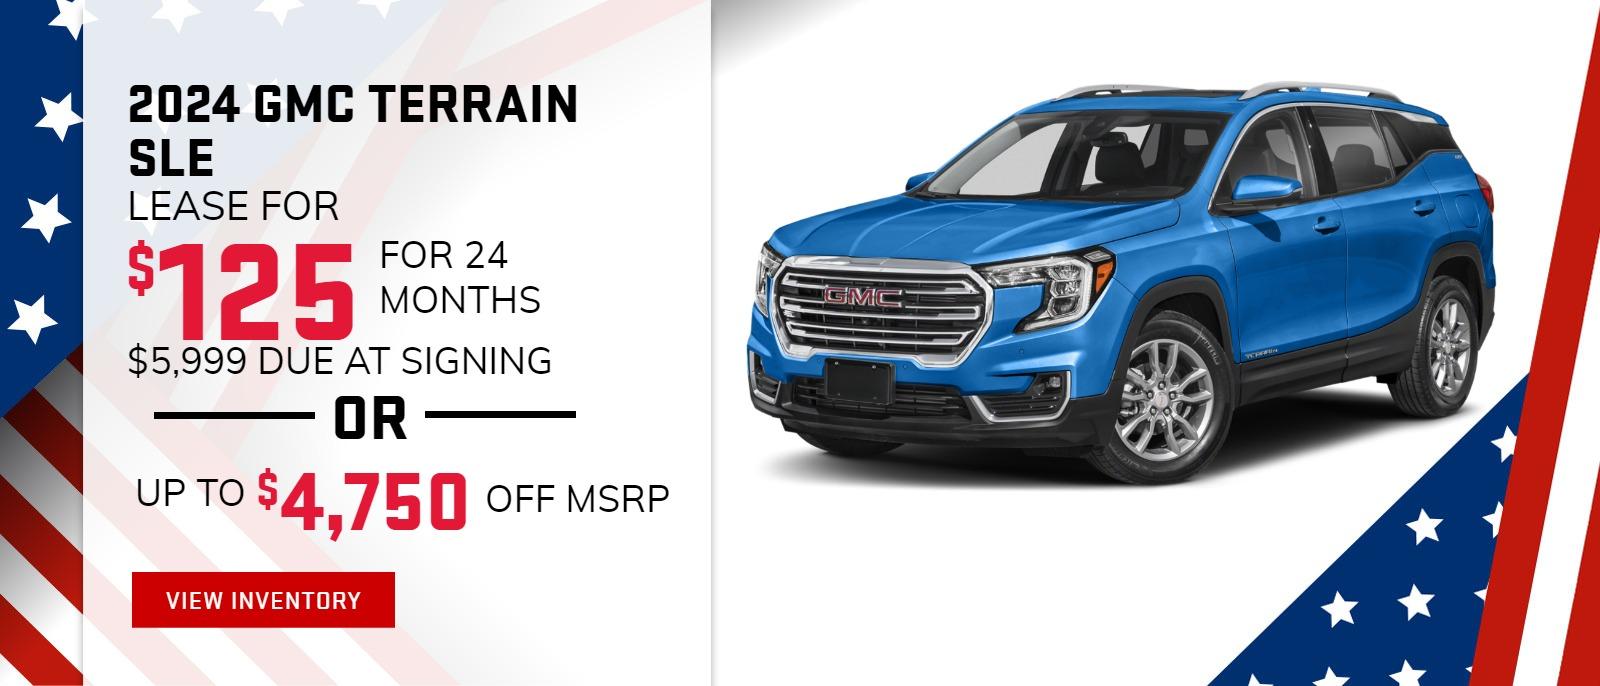 2024 GMC TERRAIN SLE
$125 Per Month / 24 months / $5999 due at Signing
$4750 OFF MSRP